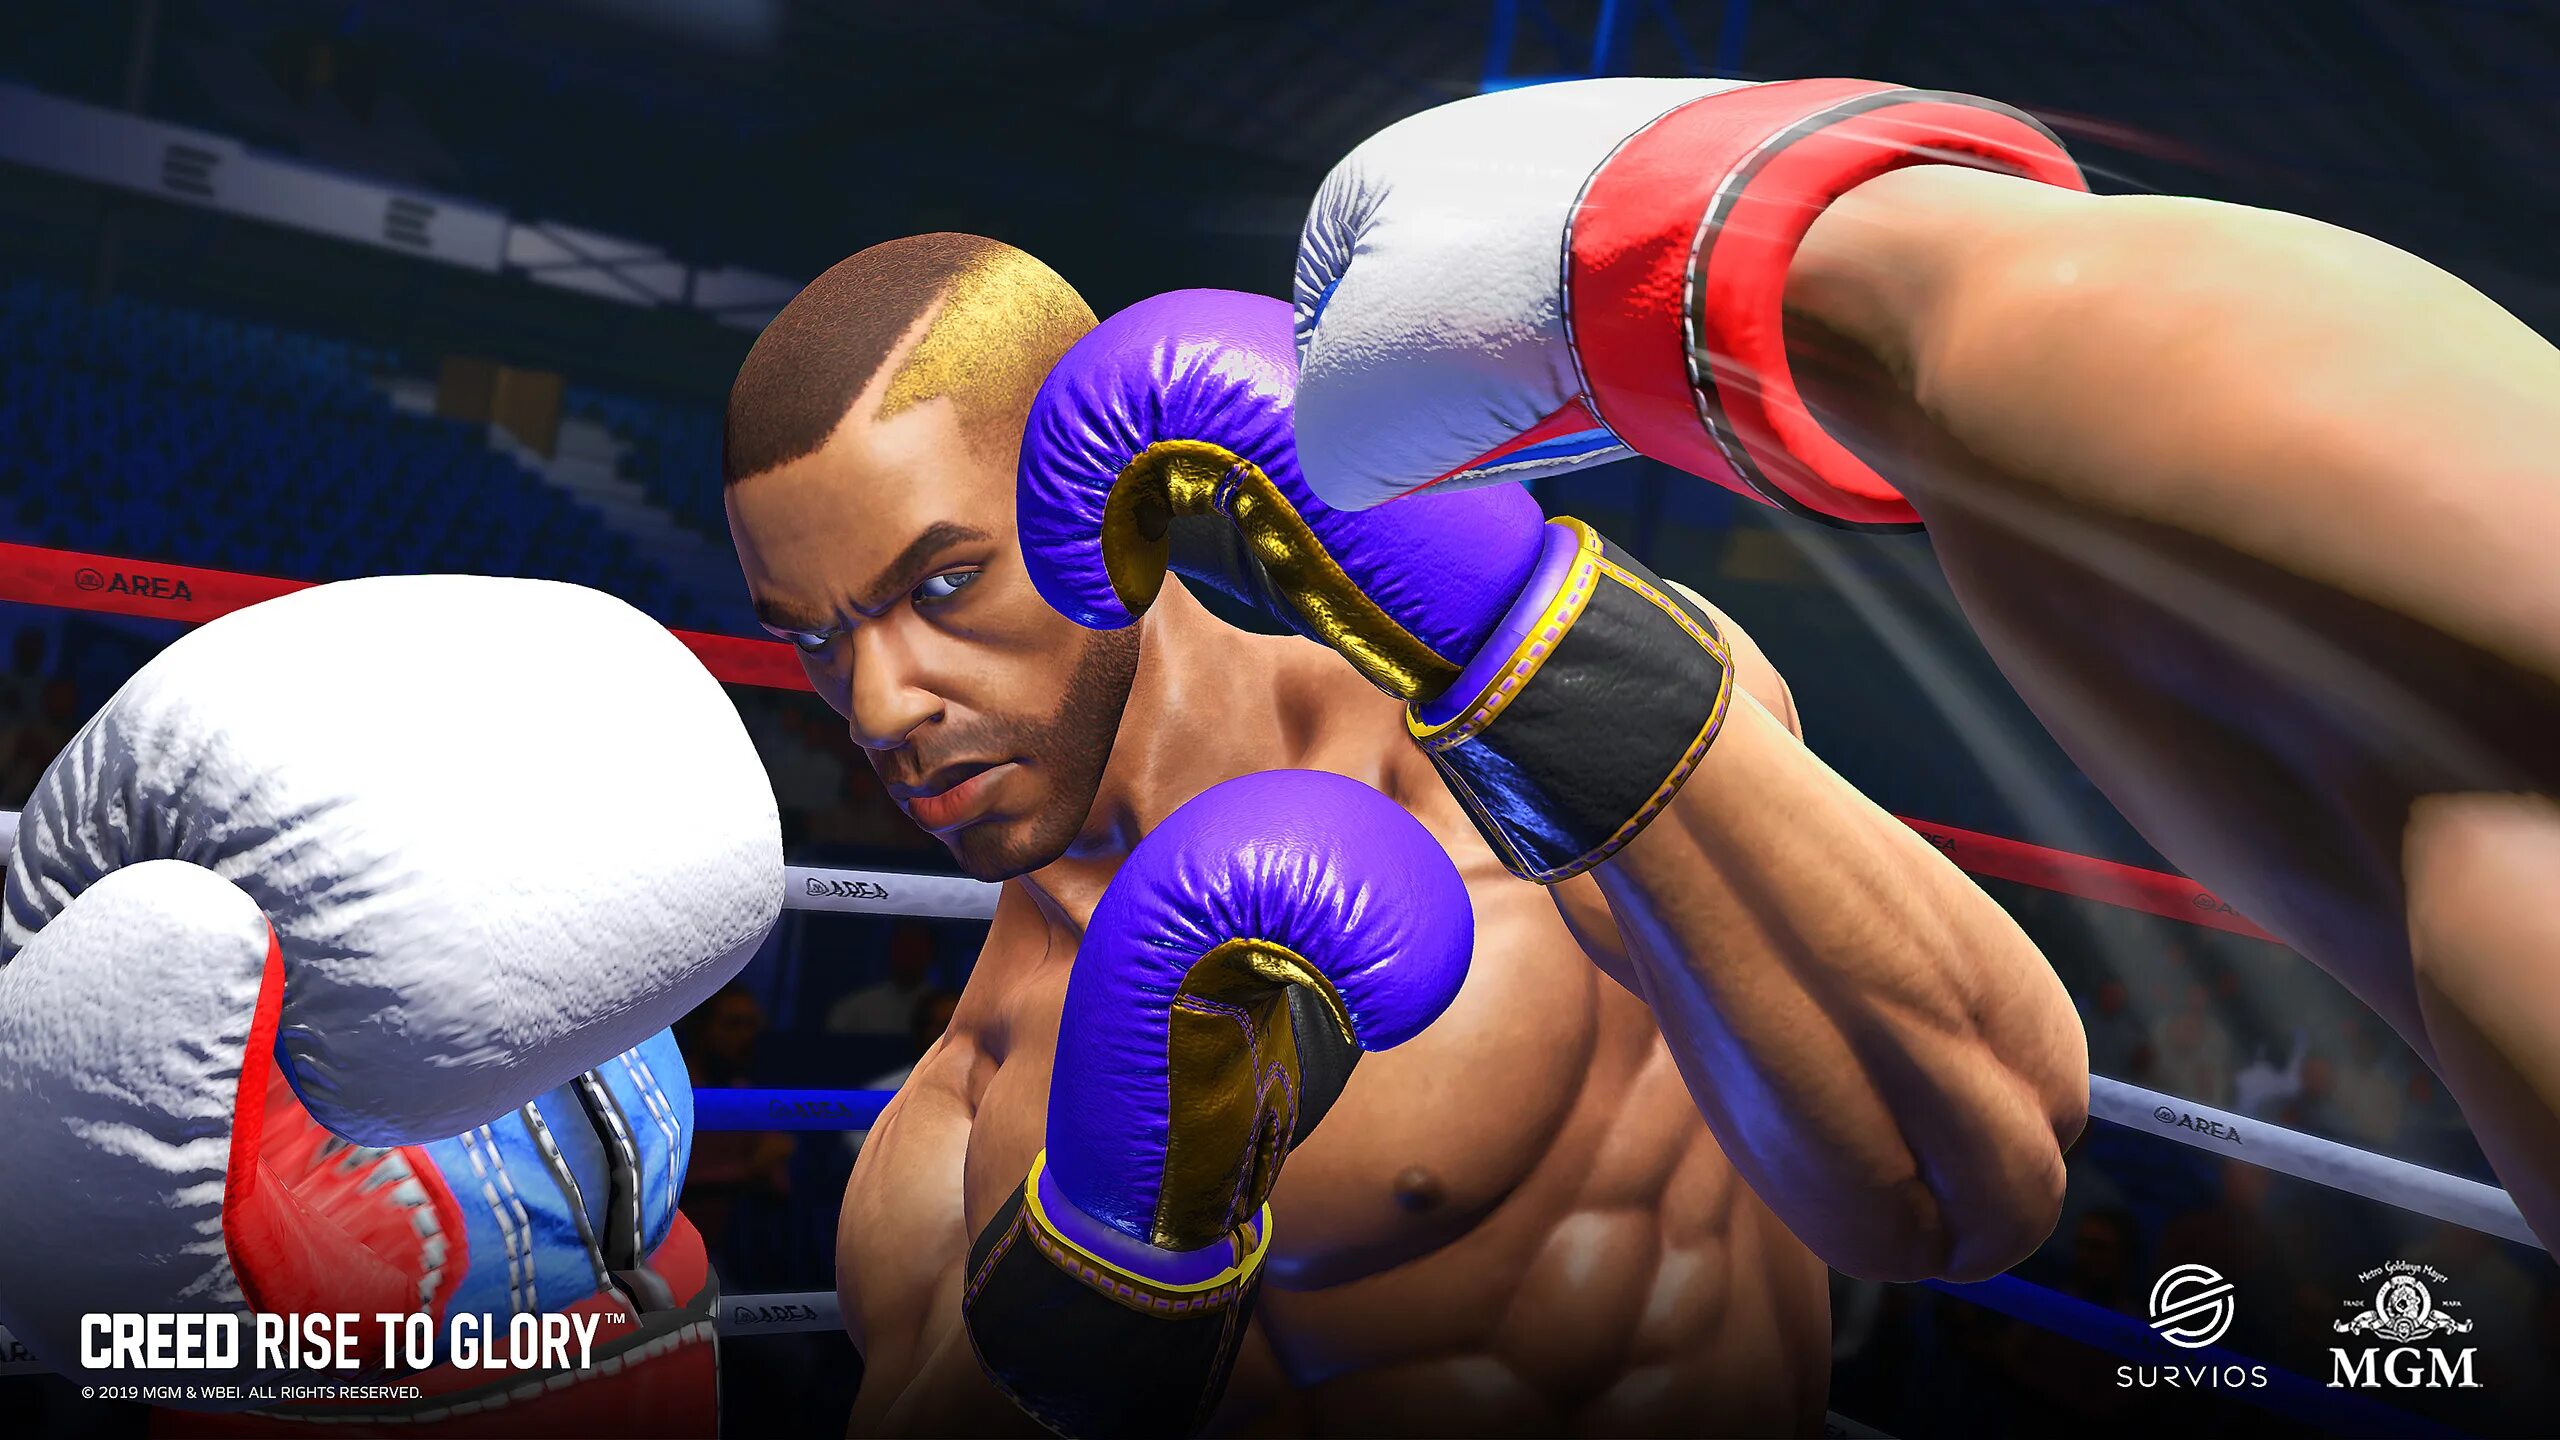 Creed Rise to Glory VR Oculus Quest 2. Oculus Quest 2 Creed. Бокс Крид VR. Oculus Quest 2 Box VR.